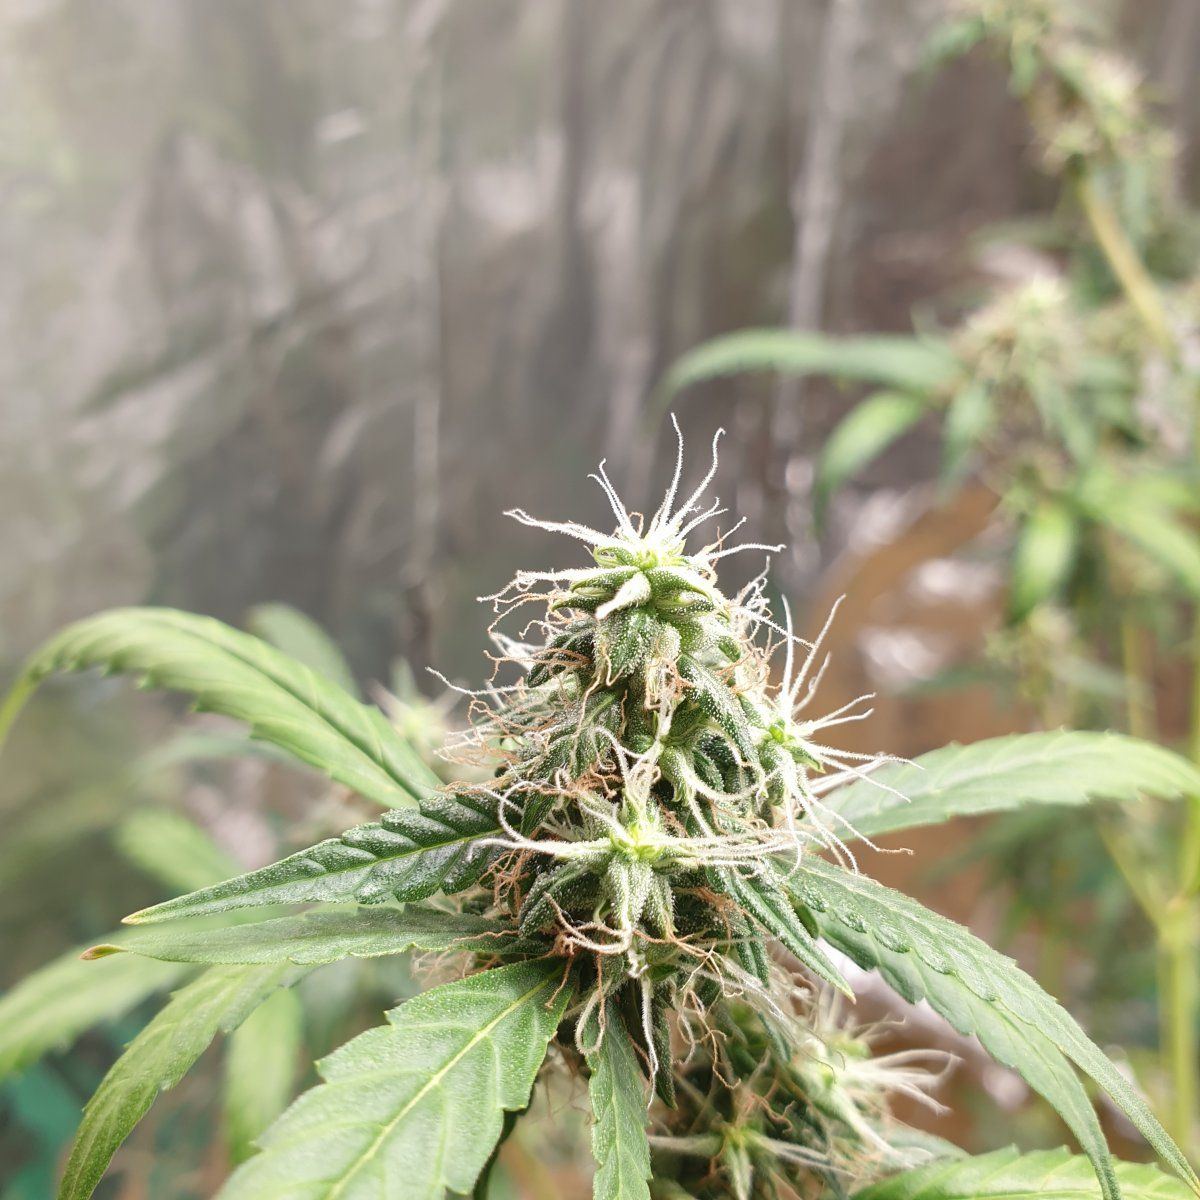 Is this ready for harvest  the best photo that i could take 4